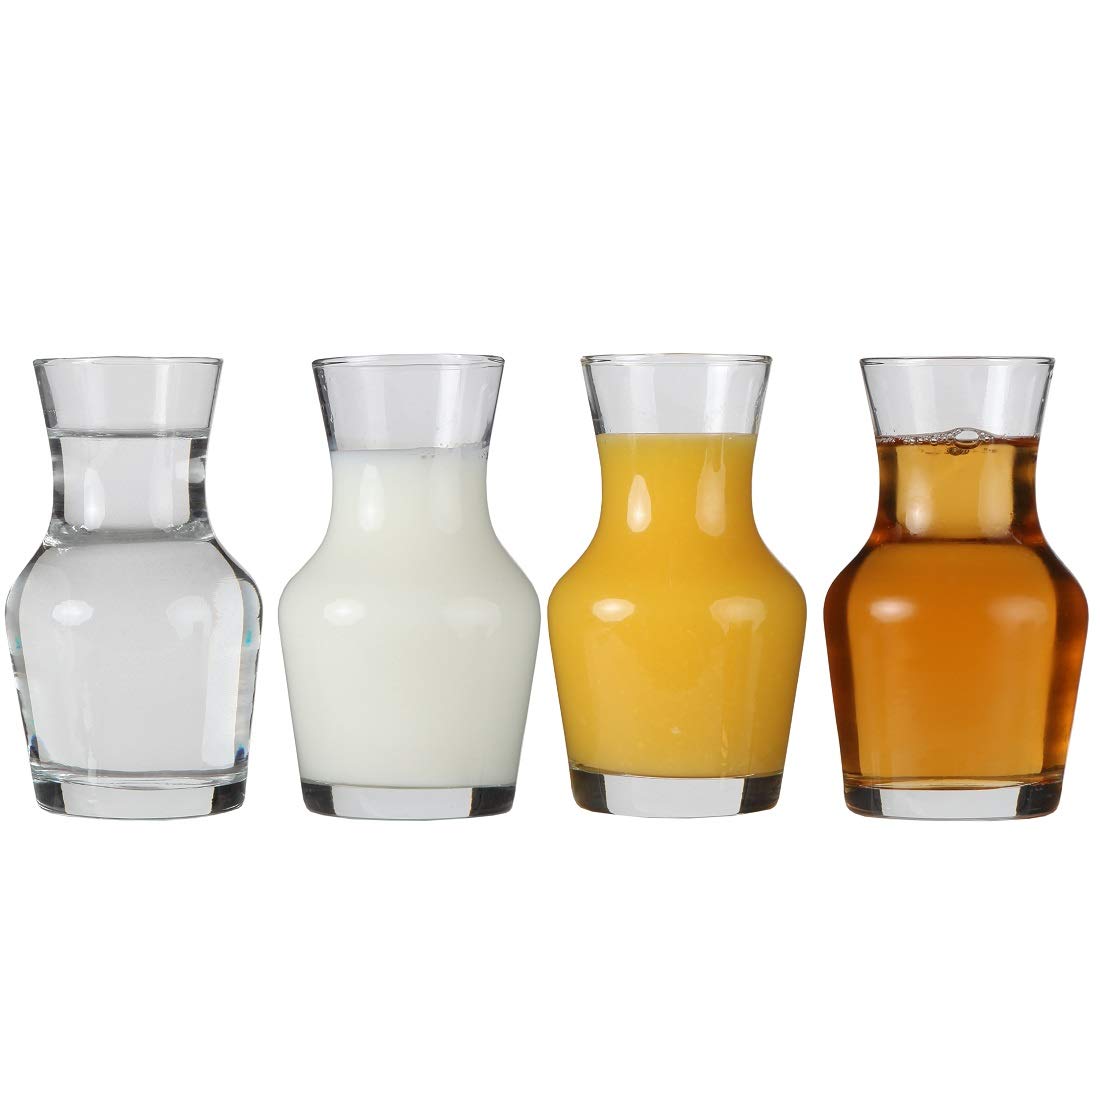 Lily's Home Individual Glass Wine Decanters, Miniature Personal Size Carafes Ideal for Dinner Parties and Wine Tastings, Makes Wonderful Gift (8.4 oz. Each, Set of 4)